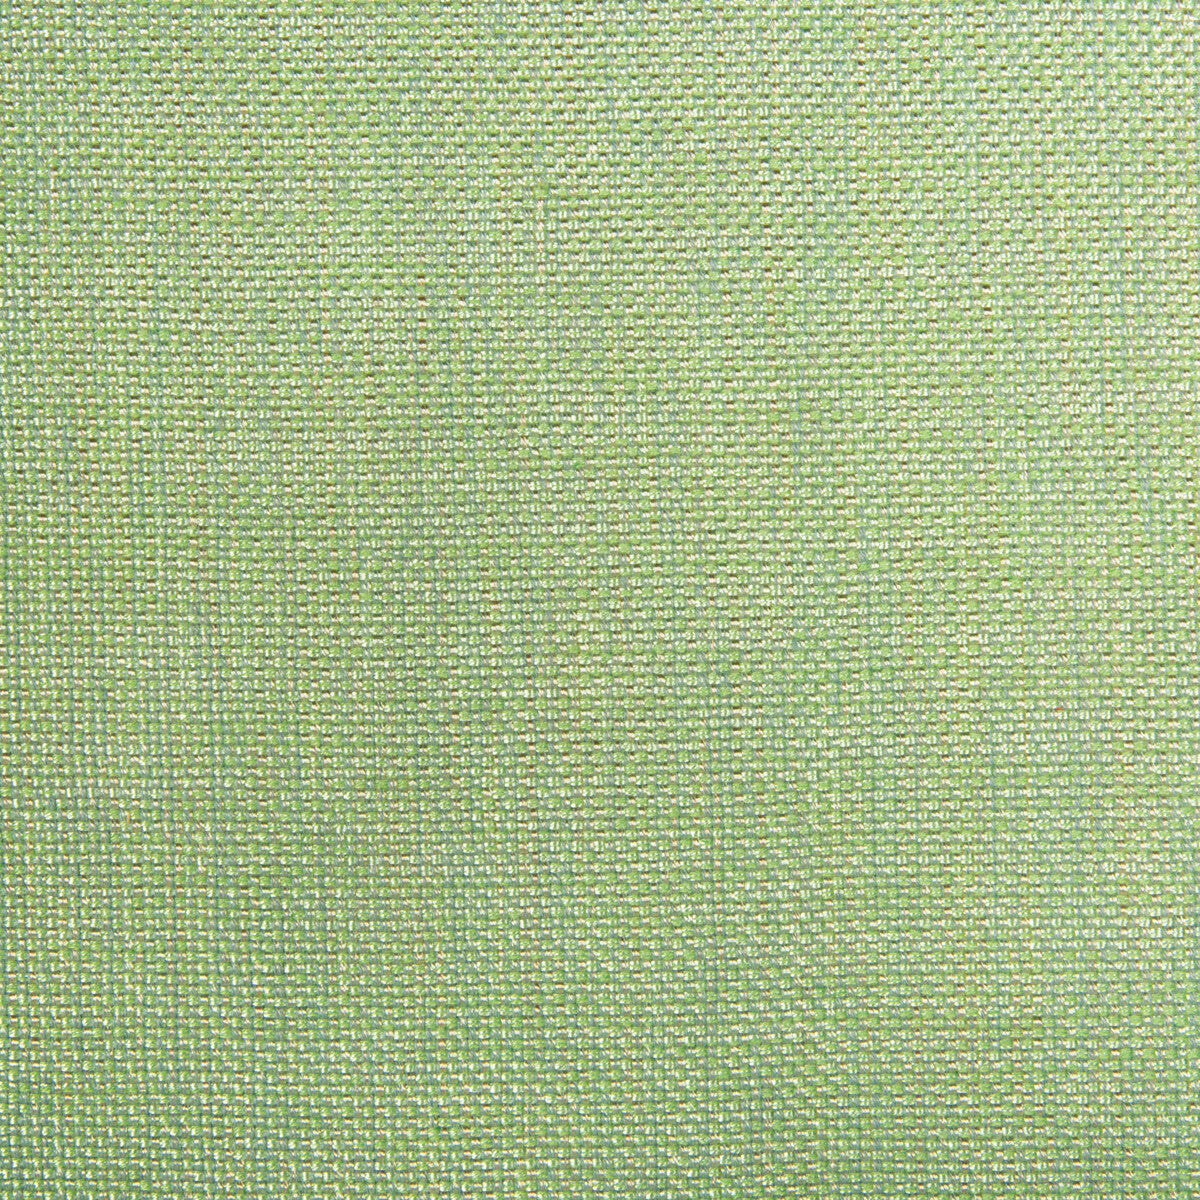 Kravet Contract fabric in 4458-123 color - pattern 4458.123.0 - by Kravet Contract